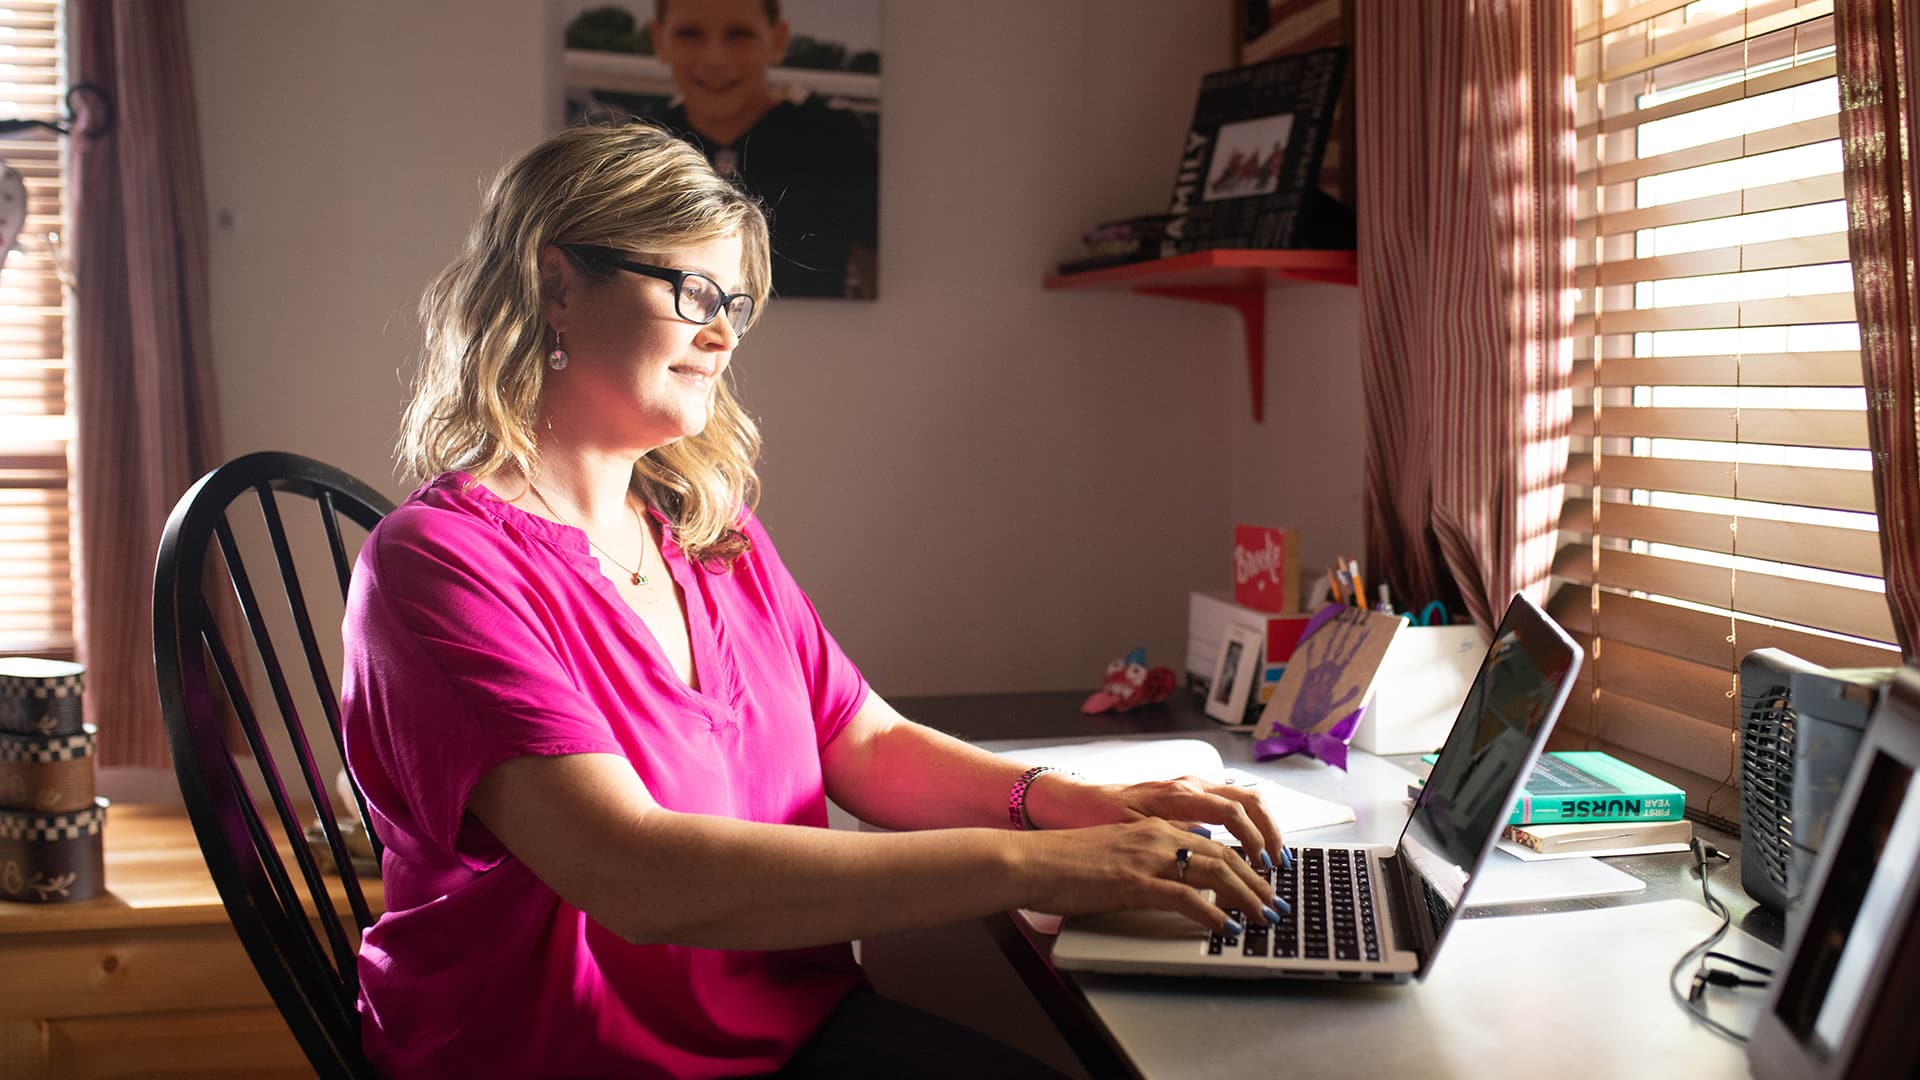 Kristina Libby, who earned her nursing degree from SNHU in 2017, in her home office wearing a pink blouse and working on her laptop. 